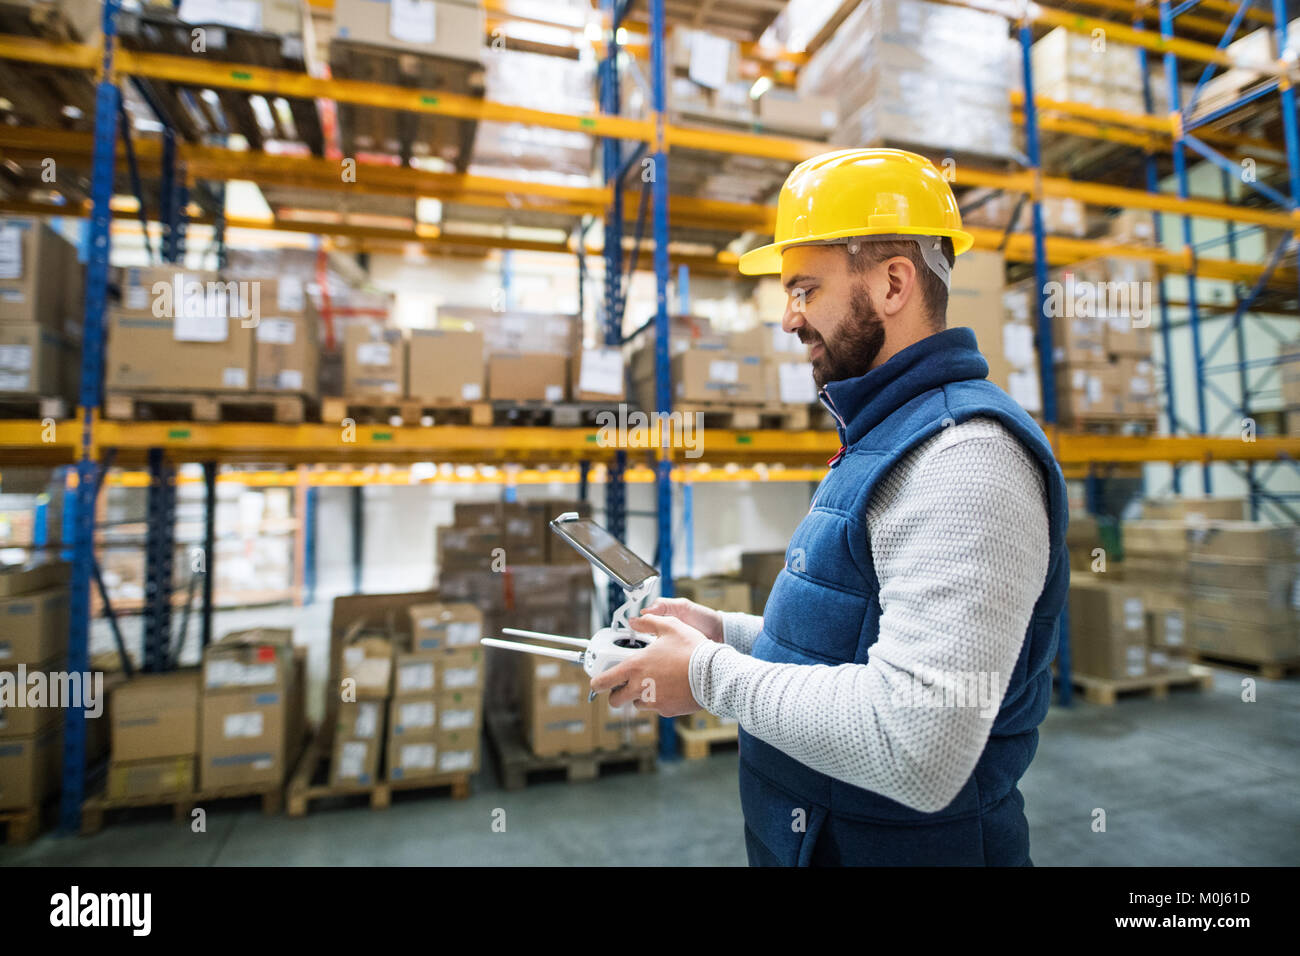 Man with tablet and drone controller in a warehouse. Stock Photo